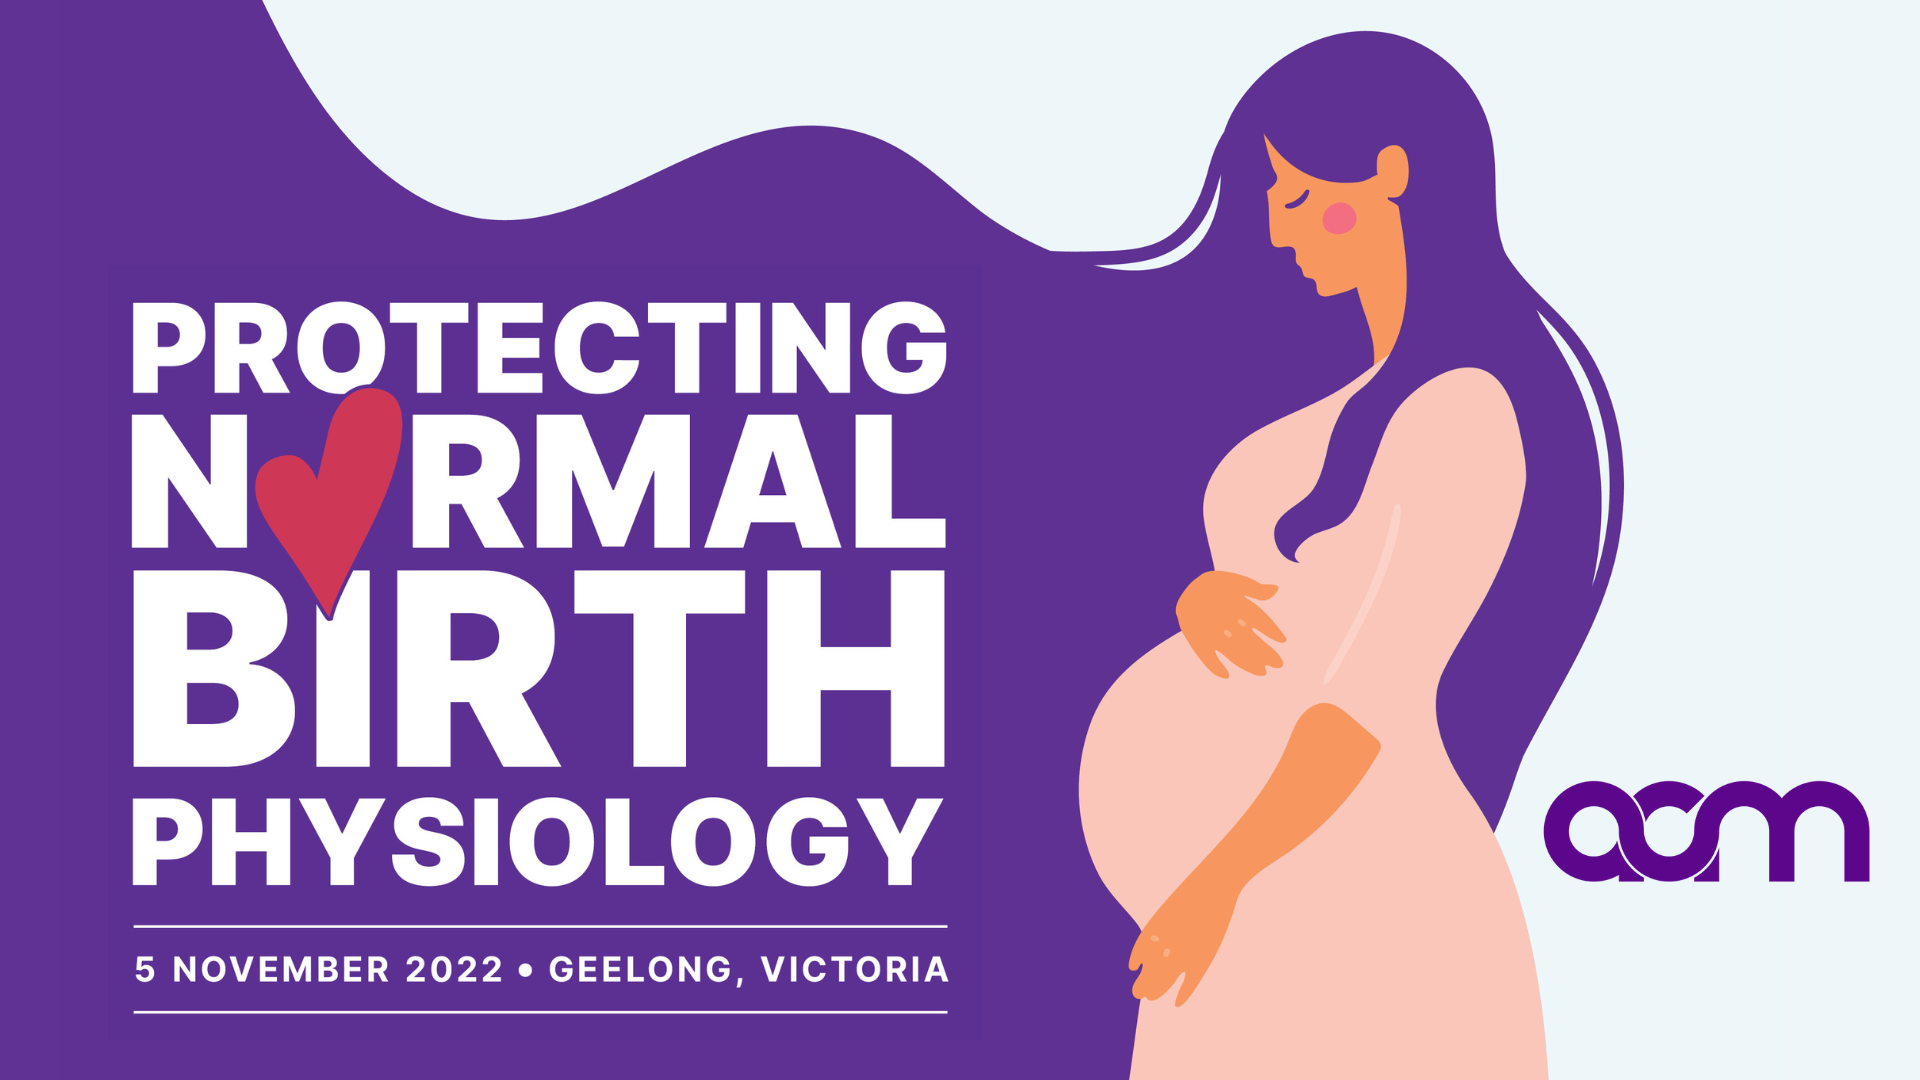 Protecting Normal Birth Physiology